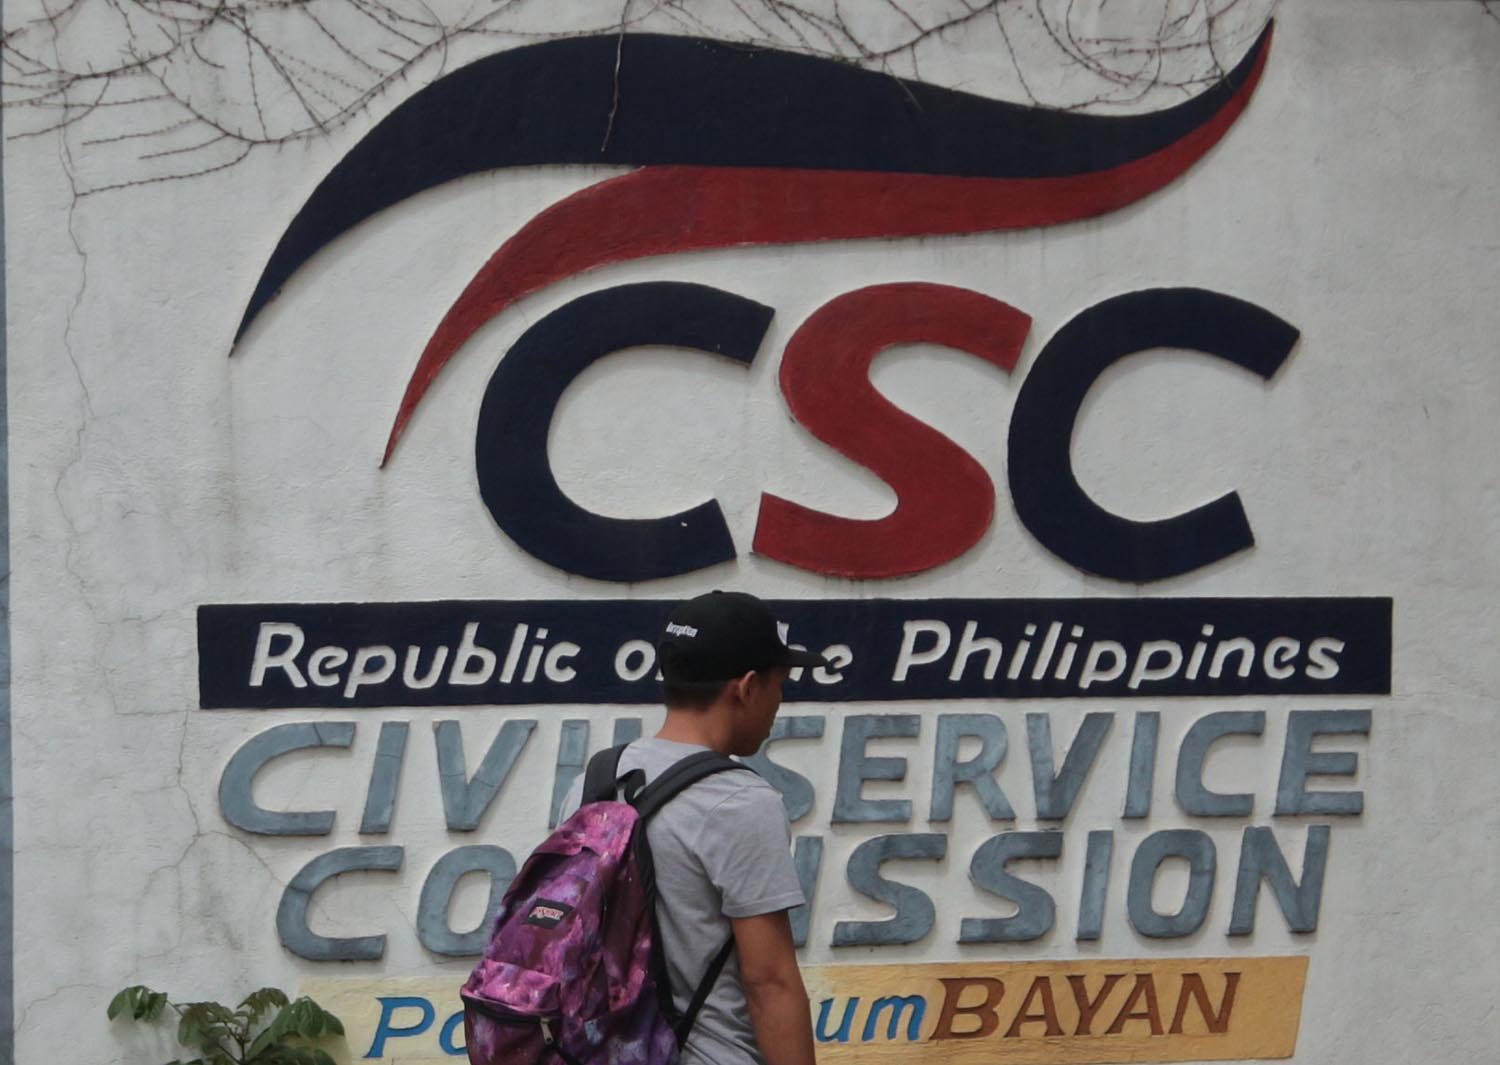 Gov’t workers involved in fixing face dismissal – CSC